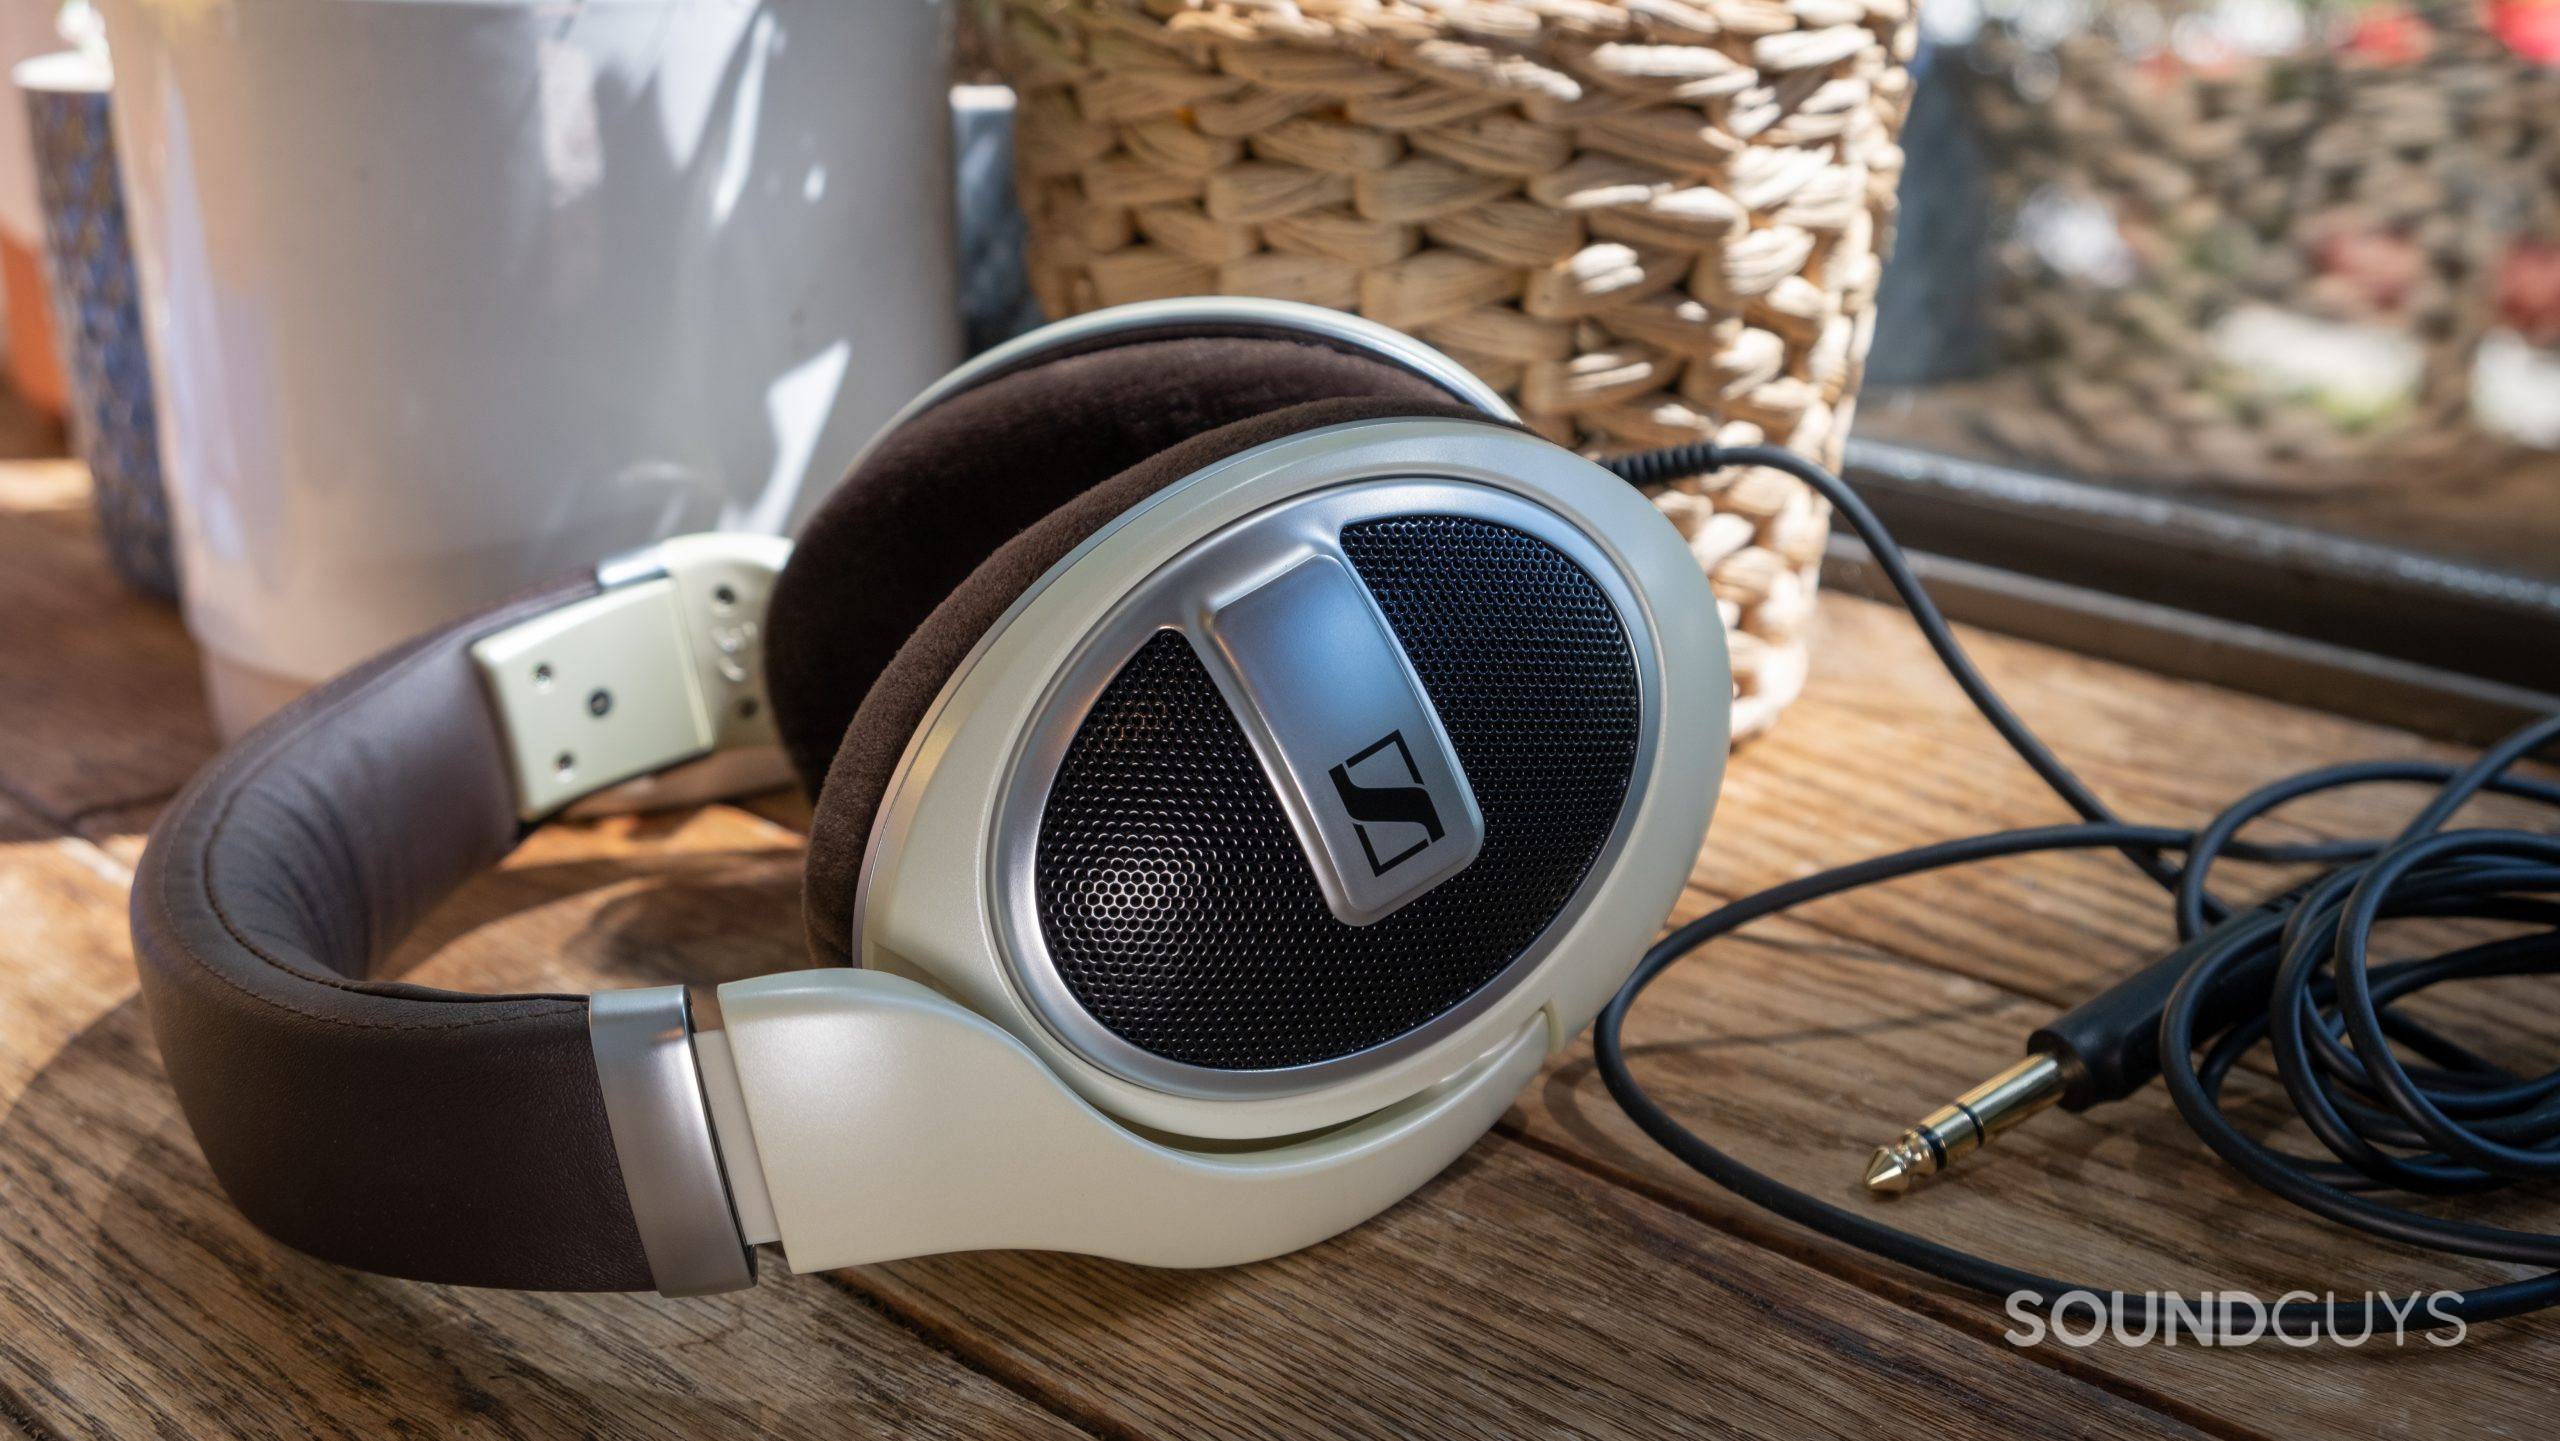 On a wood surface the Sennheiser HD 599 lays on its side showing the cable with pots and window in the background.